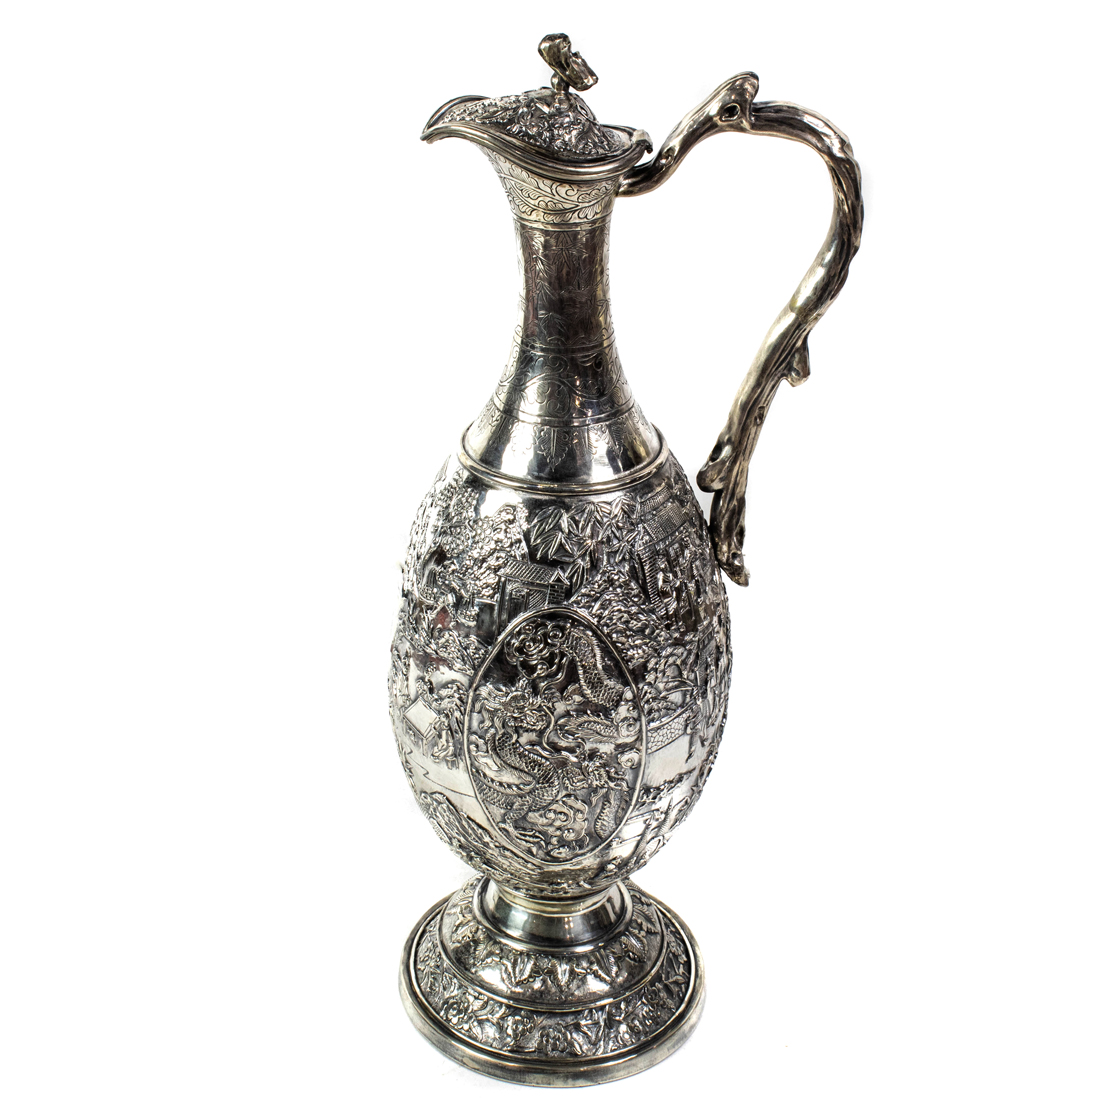 MASSIVE CHINESE EXPORT SILVER EWER 2cdd9b